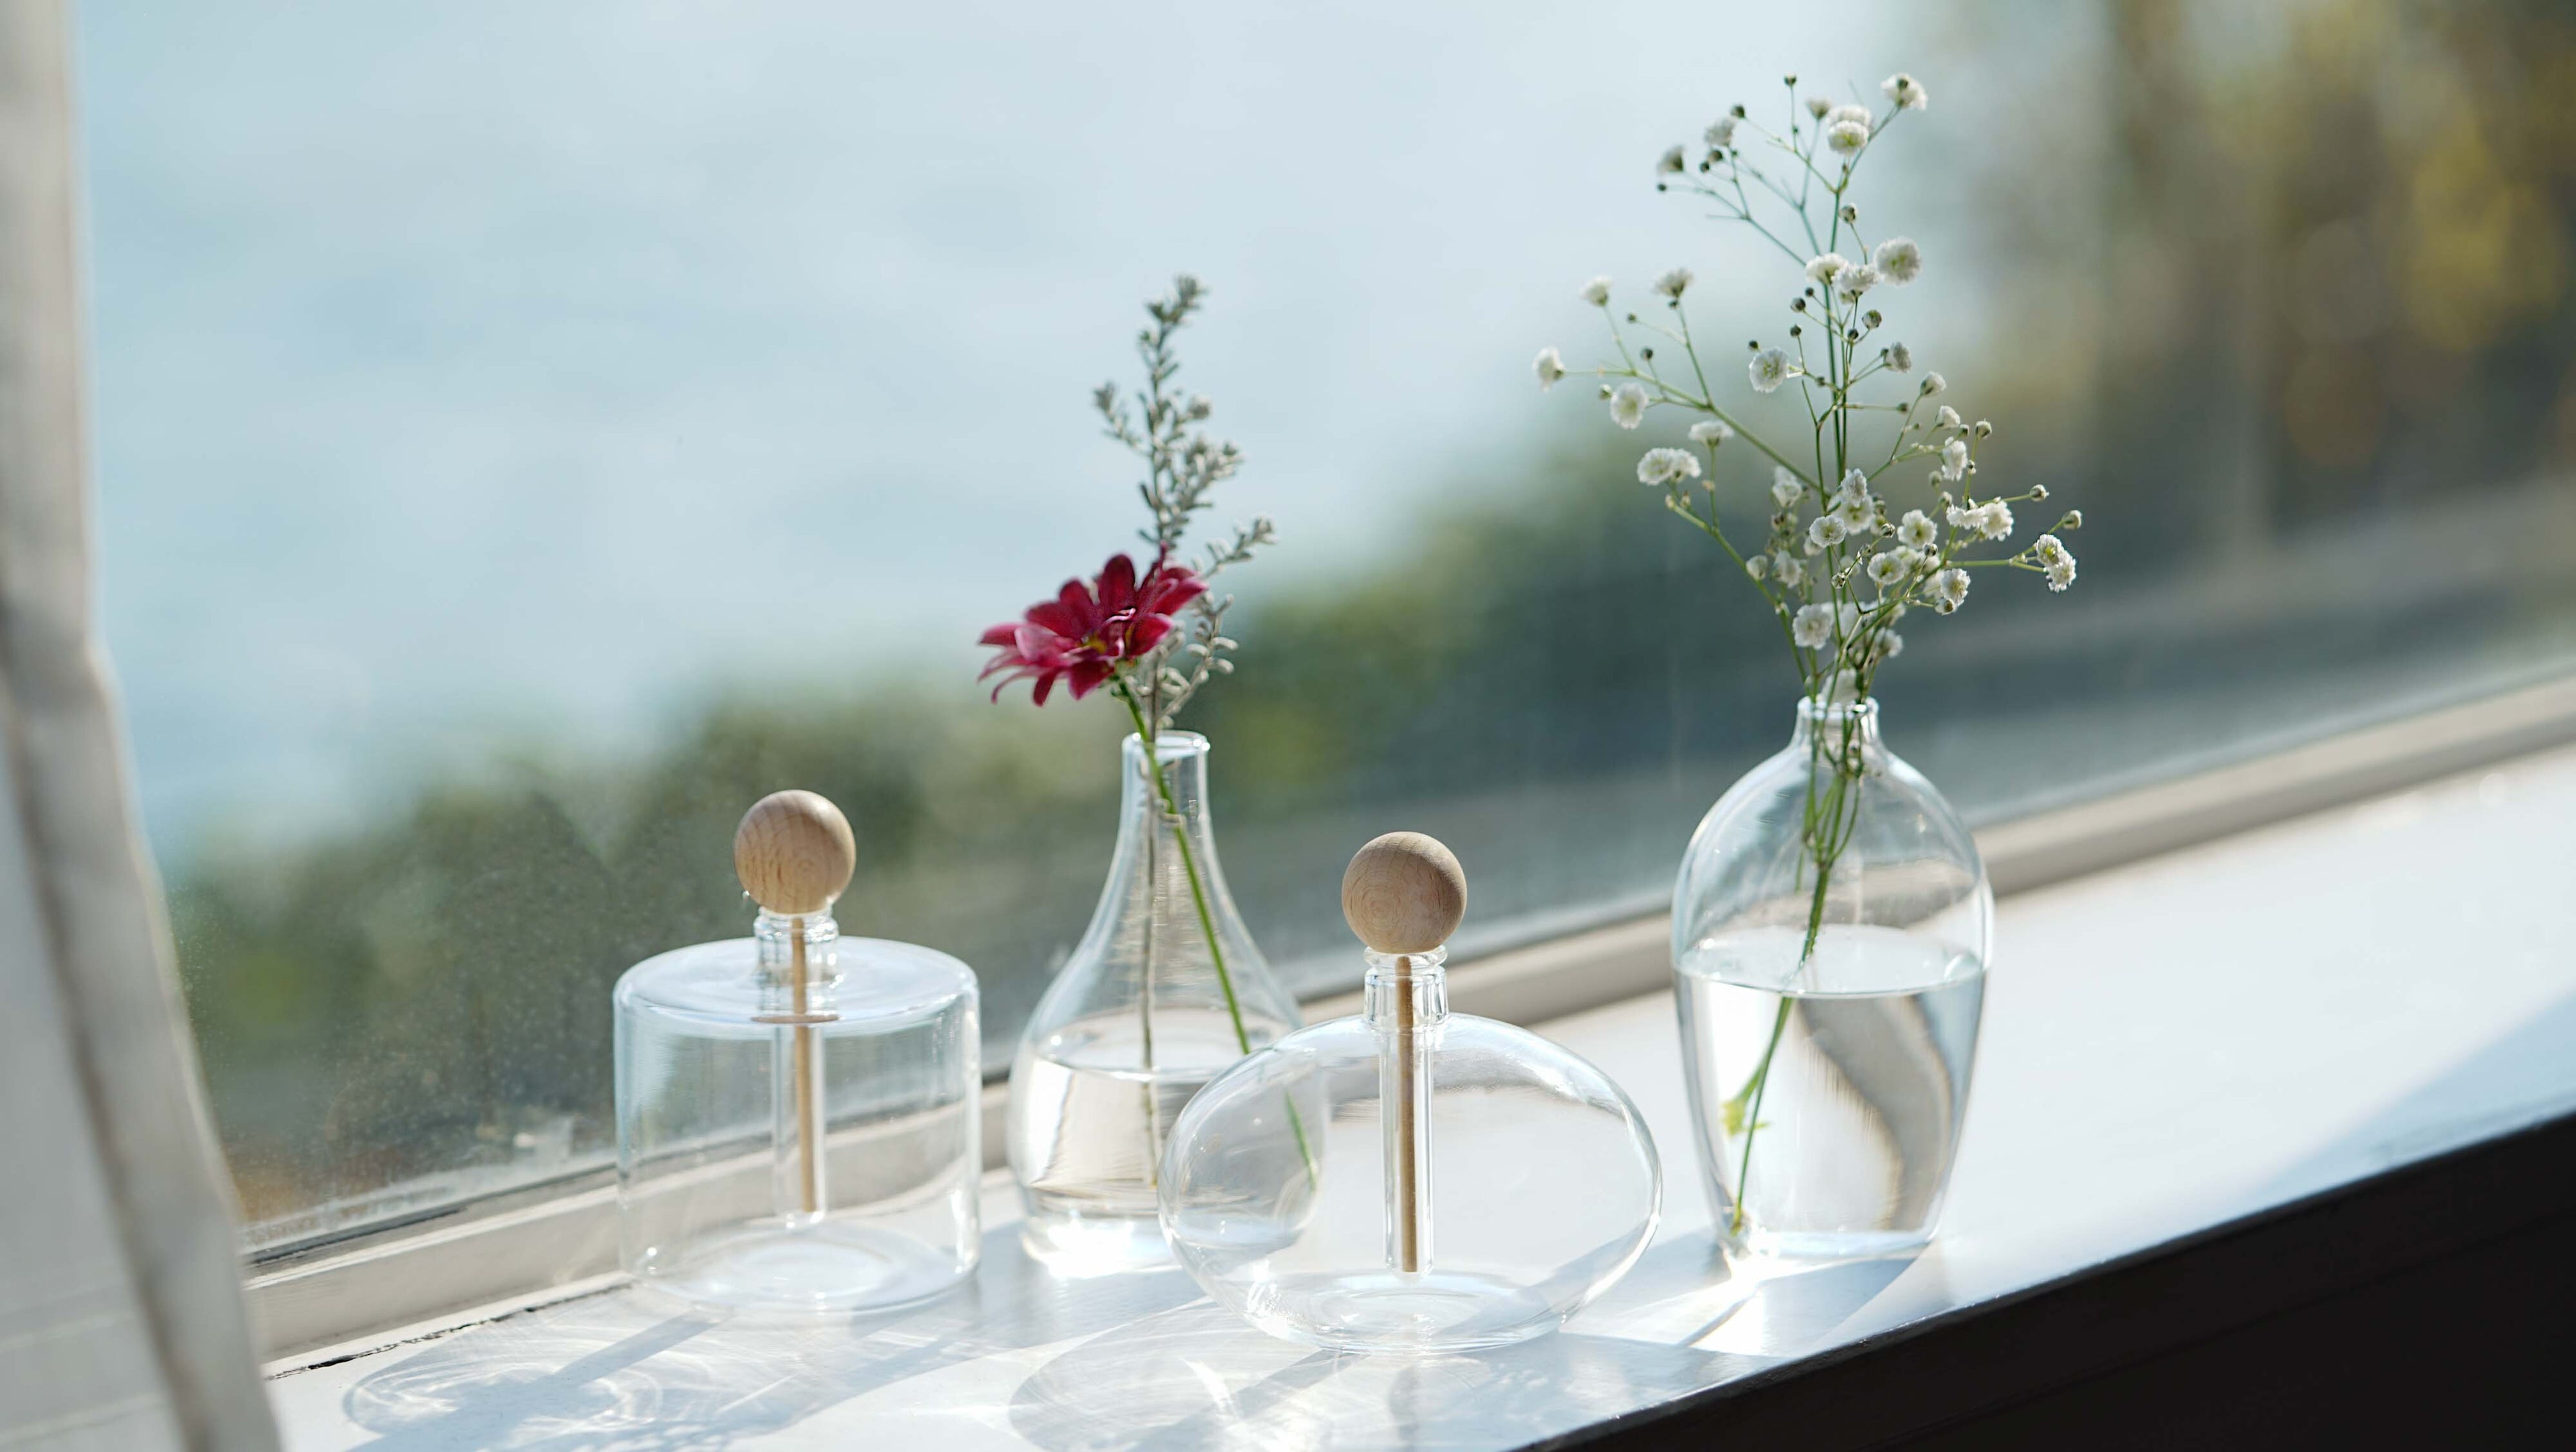 four glass diffusers of different shapes, cylindrical, tear-dropped, oval, and tuxedo, set on a white windowsill with blurred greenery outside the window. The cylindrical and oval shaped diffusers have the natural wood inserts in them and the remaining two diffusers have water and angel&